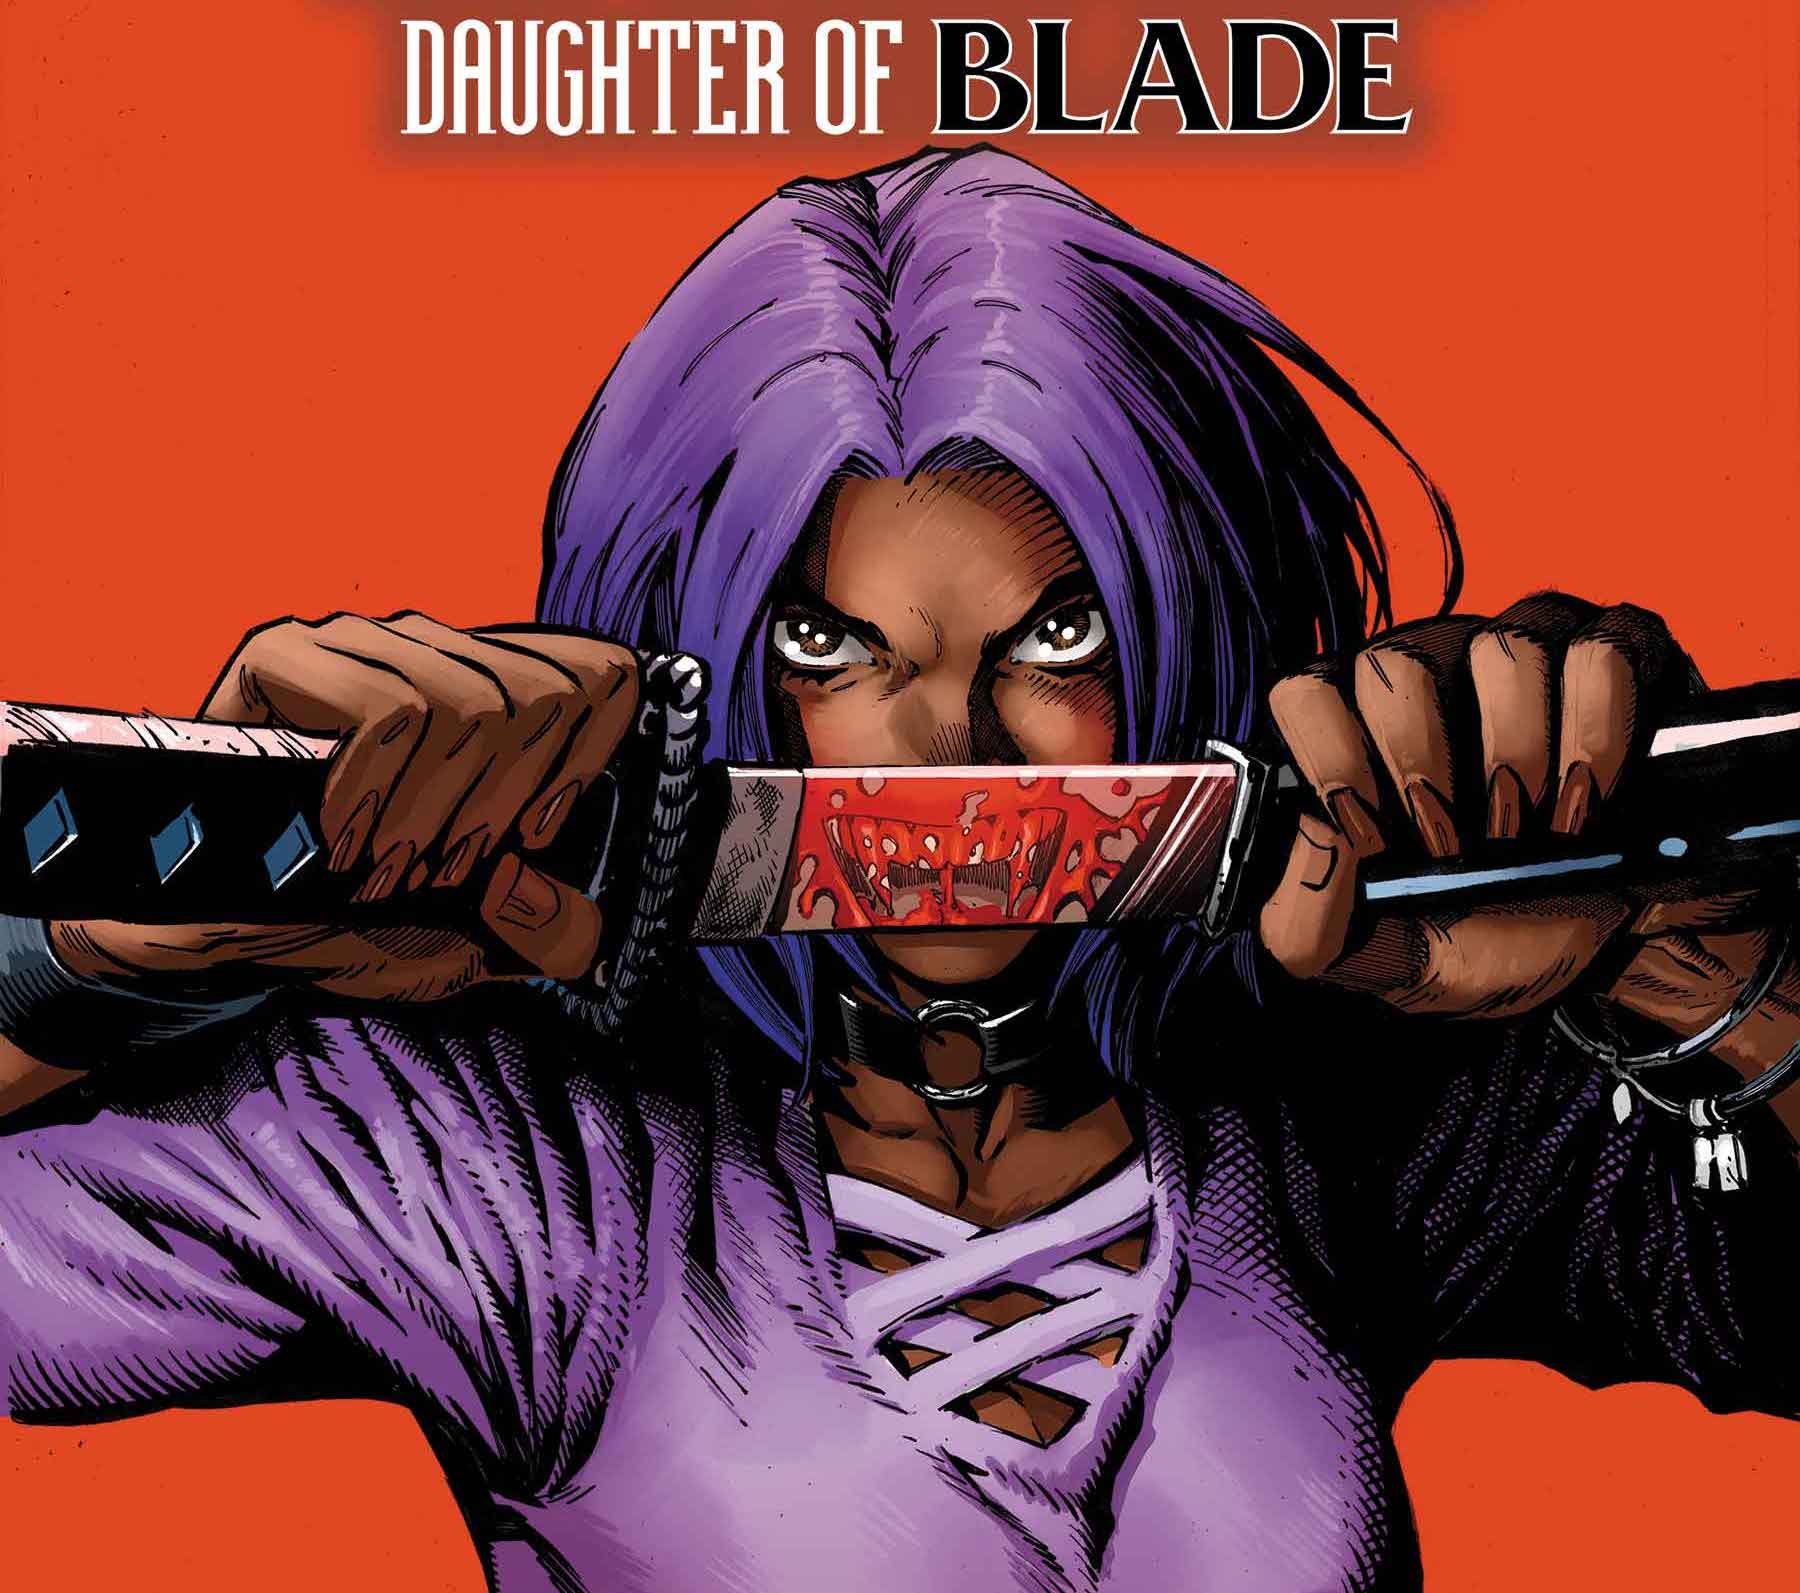 'Bloodline: Daughter of Blade' miniseries launching February 2nd